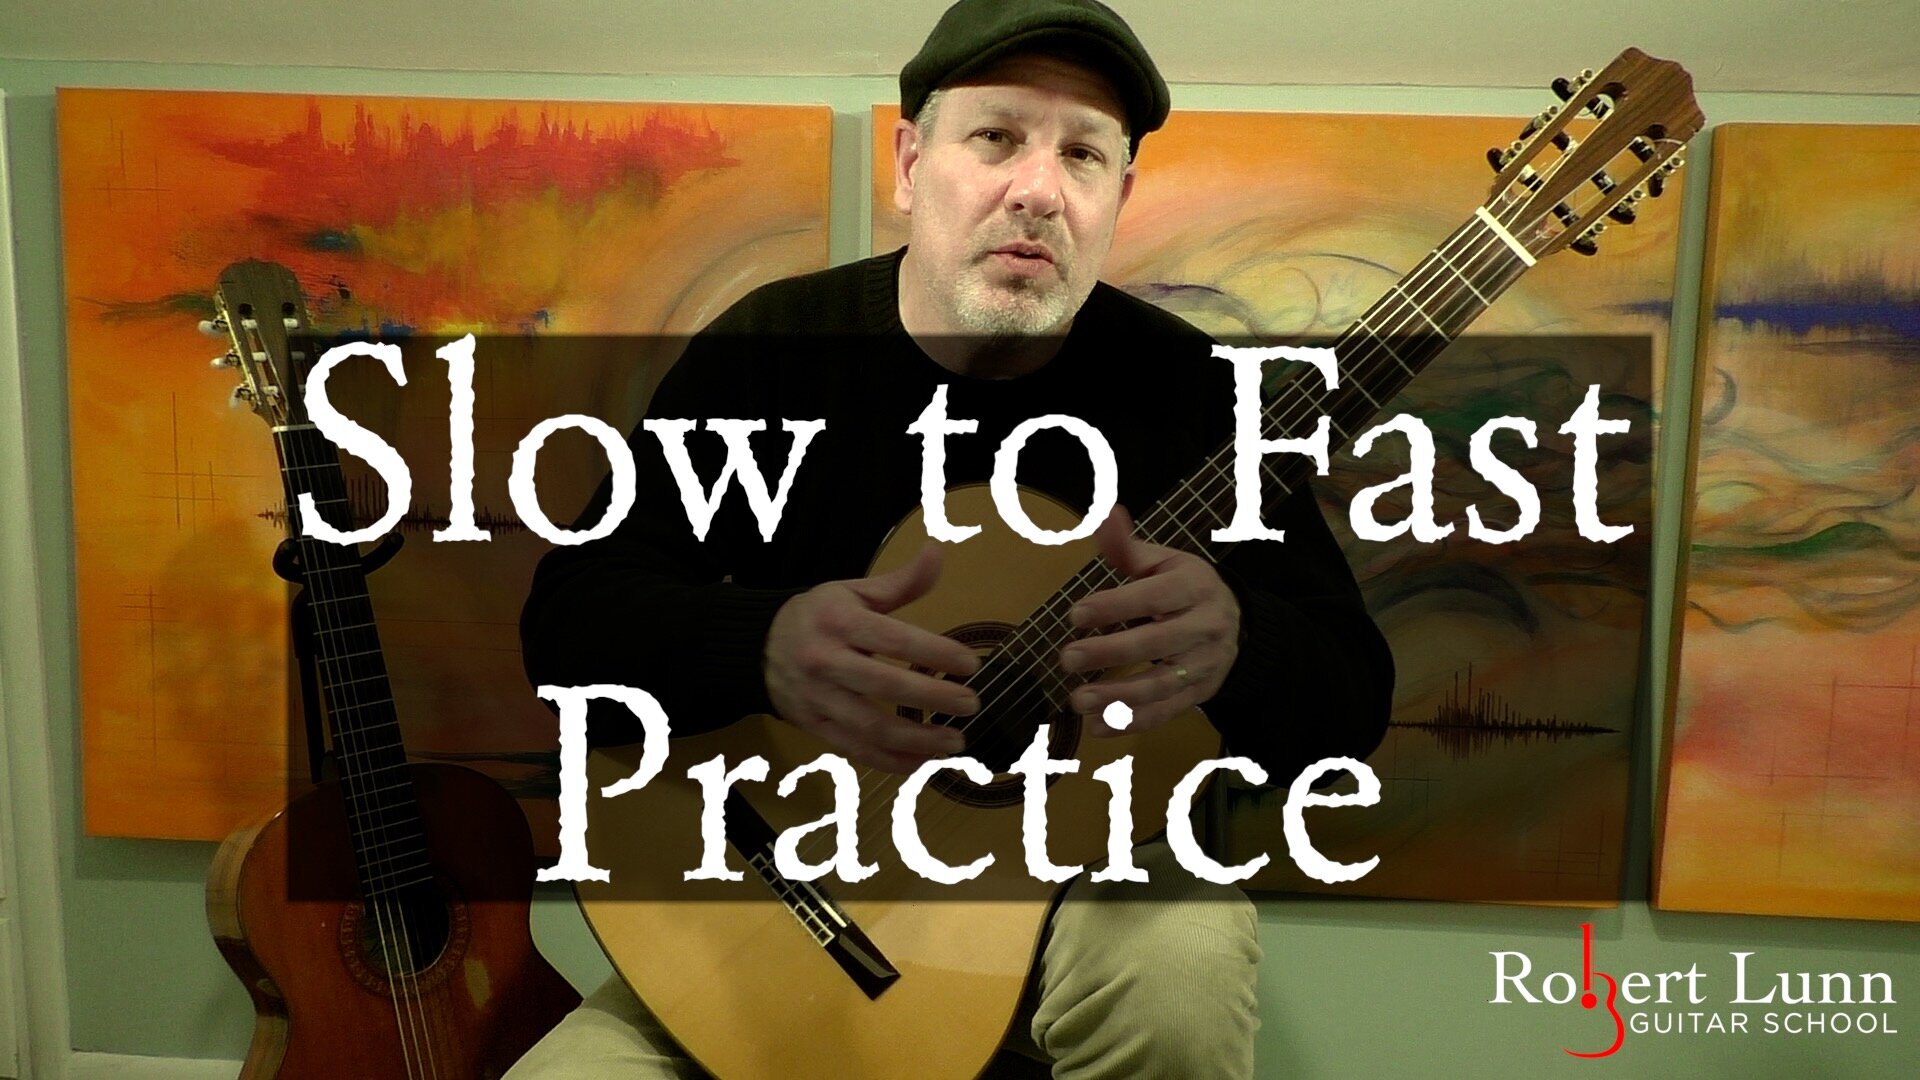 Slow to Fast Practice (One Minute Lesson) Thumbnail.jpg